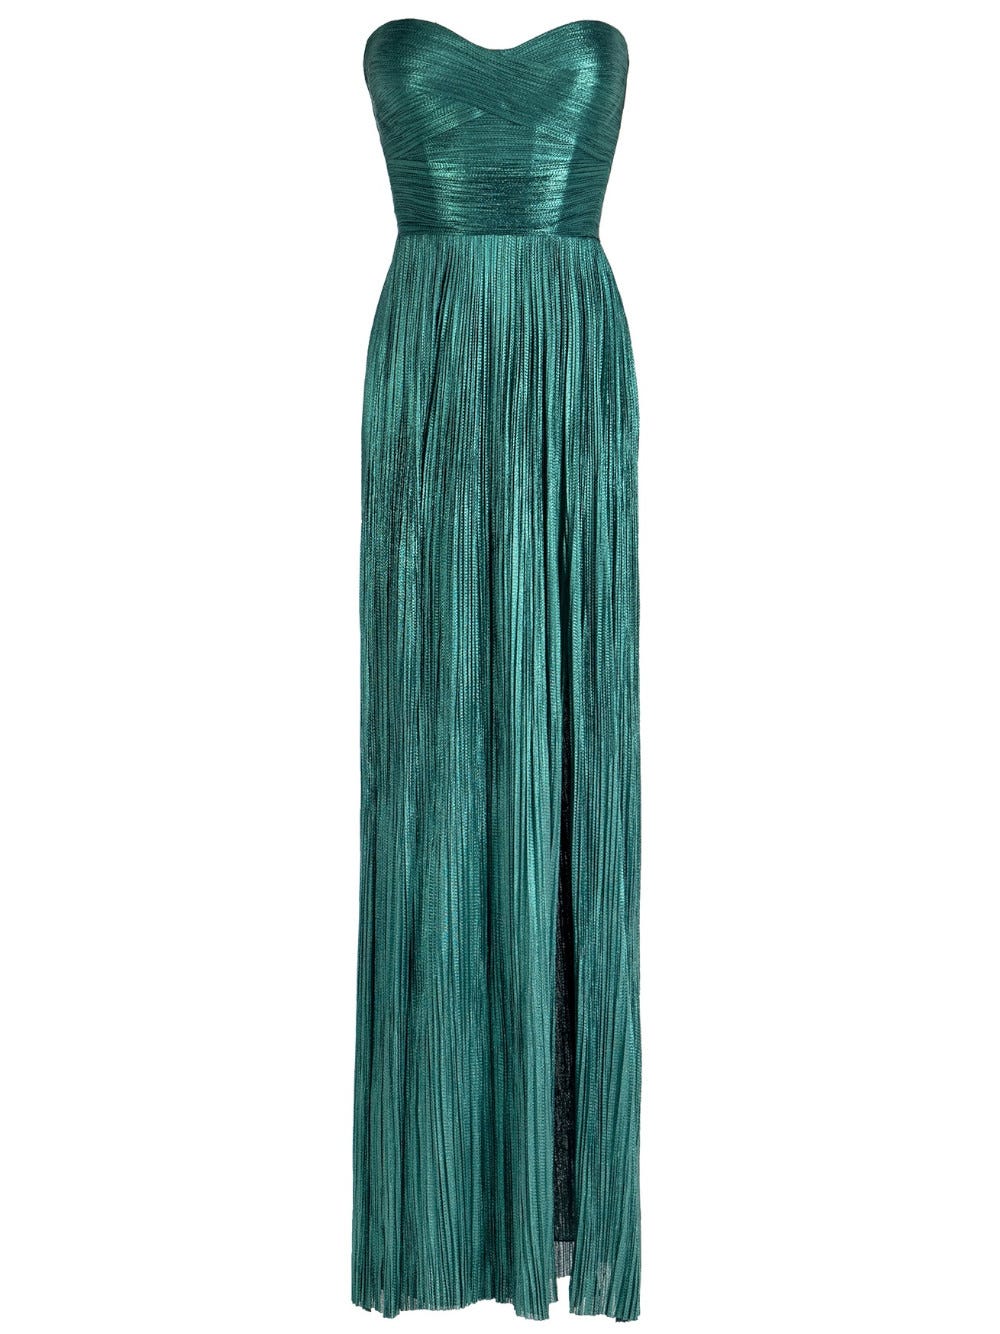 Maria Lucia Hohan Carla Green Evening Dress With Sweetheart Neckline And Removable Shawl